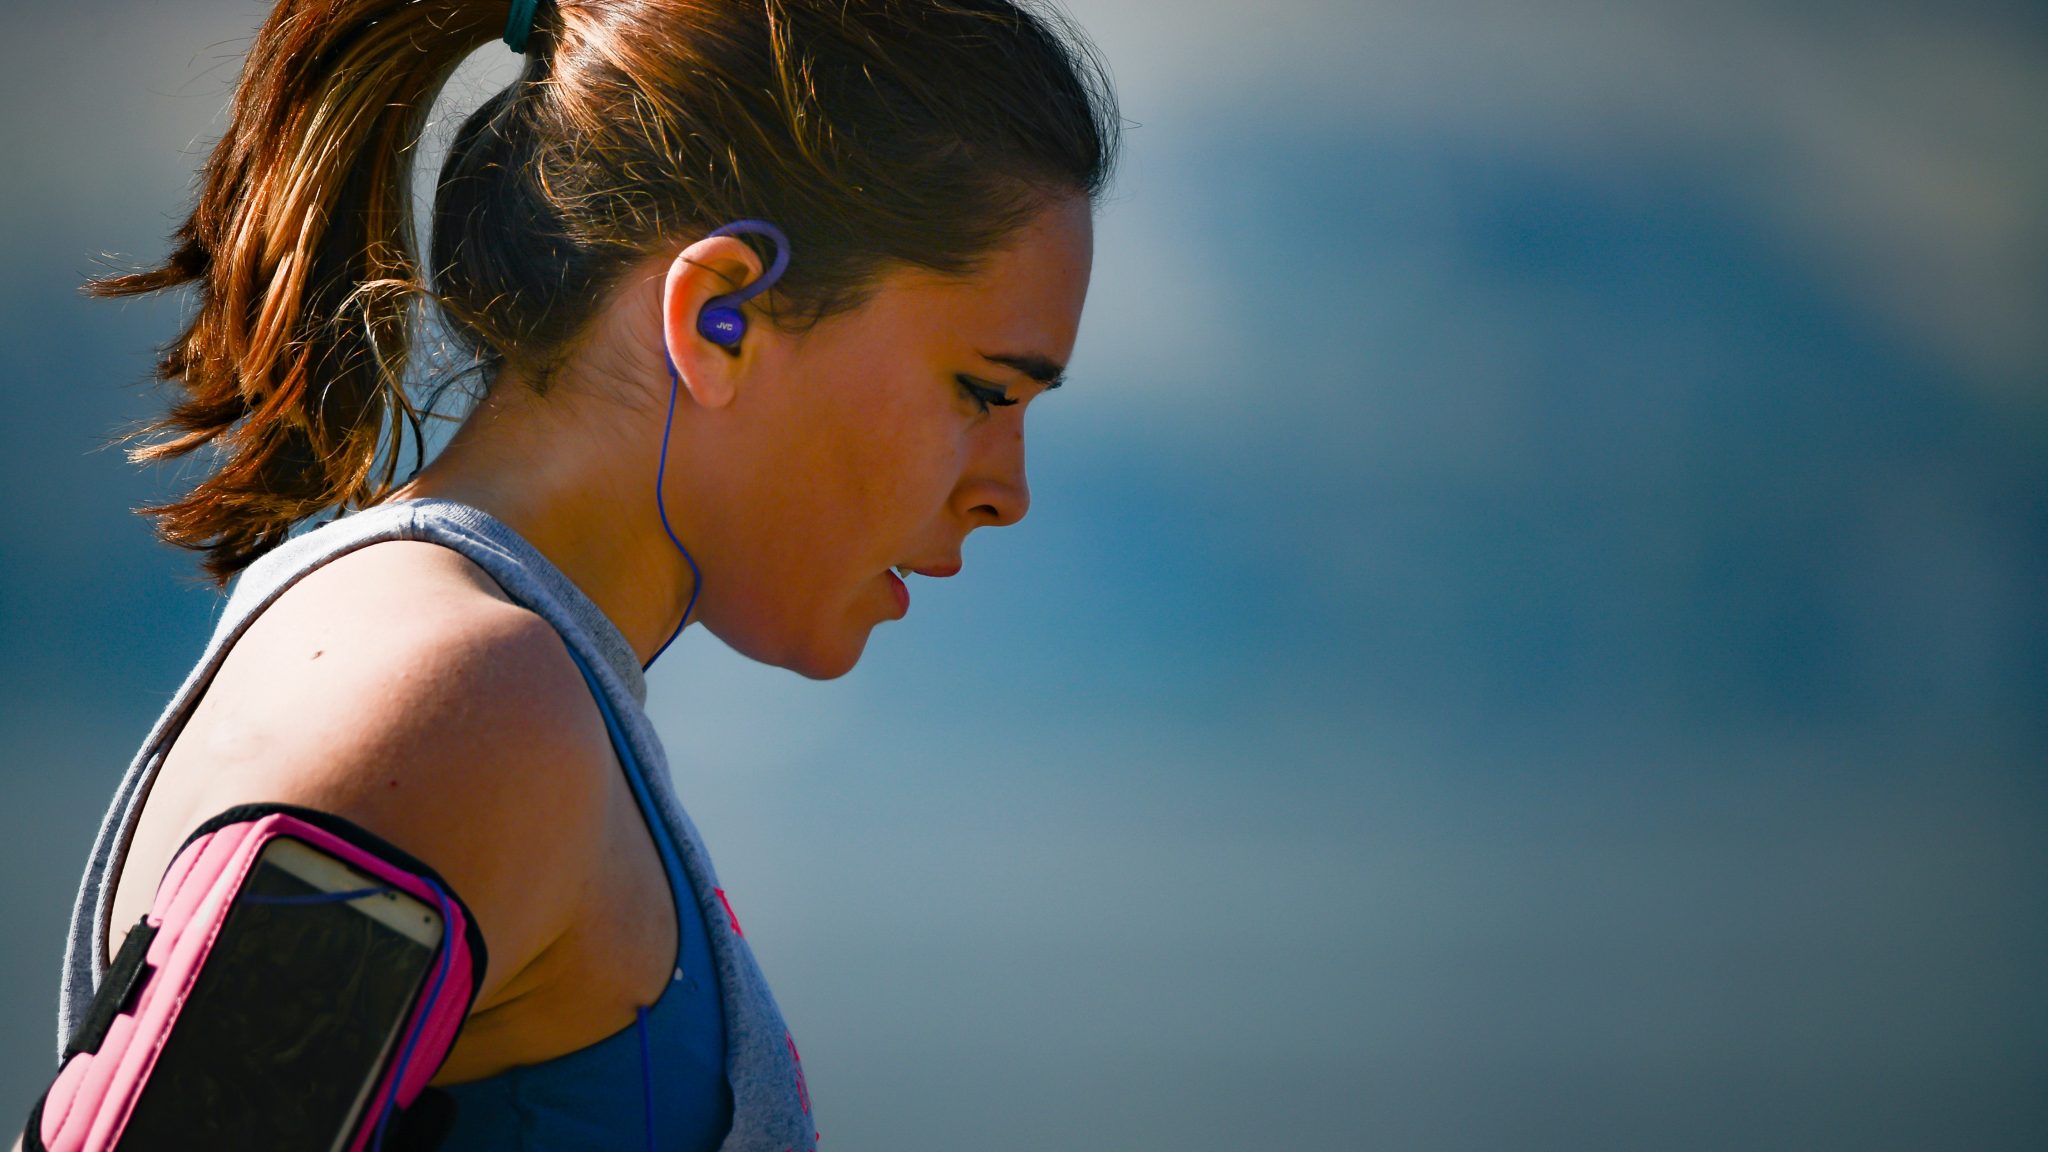 5 BEST HEADPHONES FOR WORKOUTS AND EXERCISES: THEIR SPECS AND PRICE RANGES IN NIGERIA